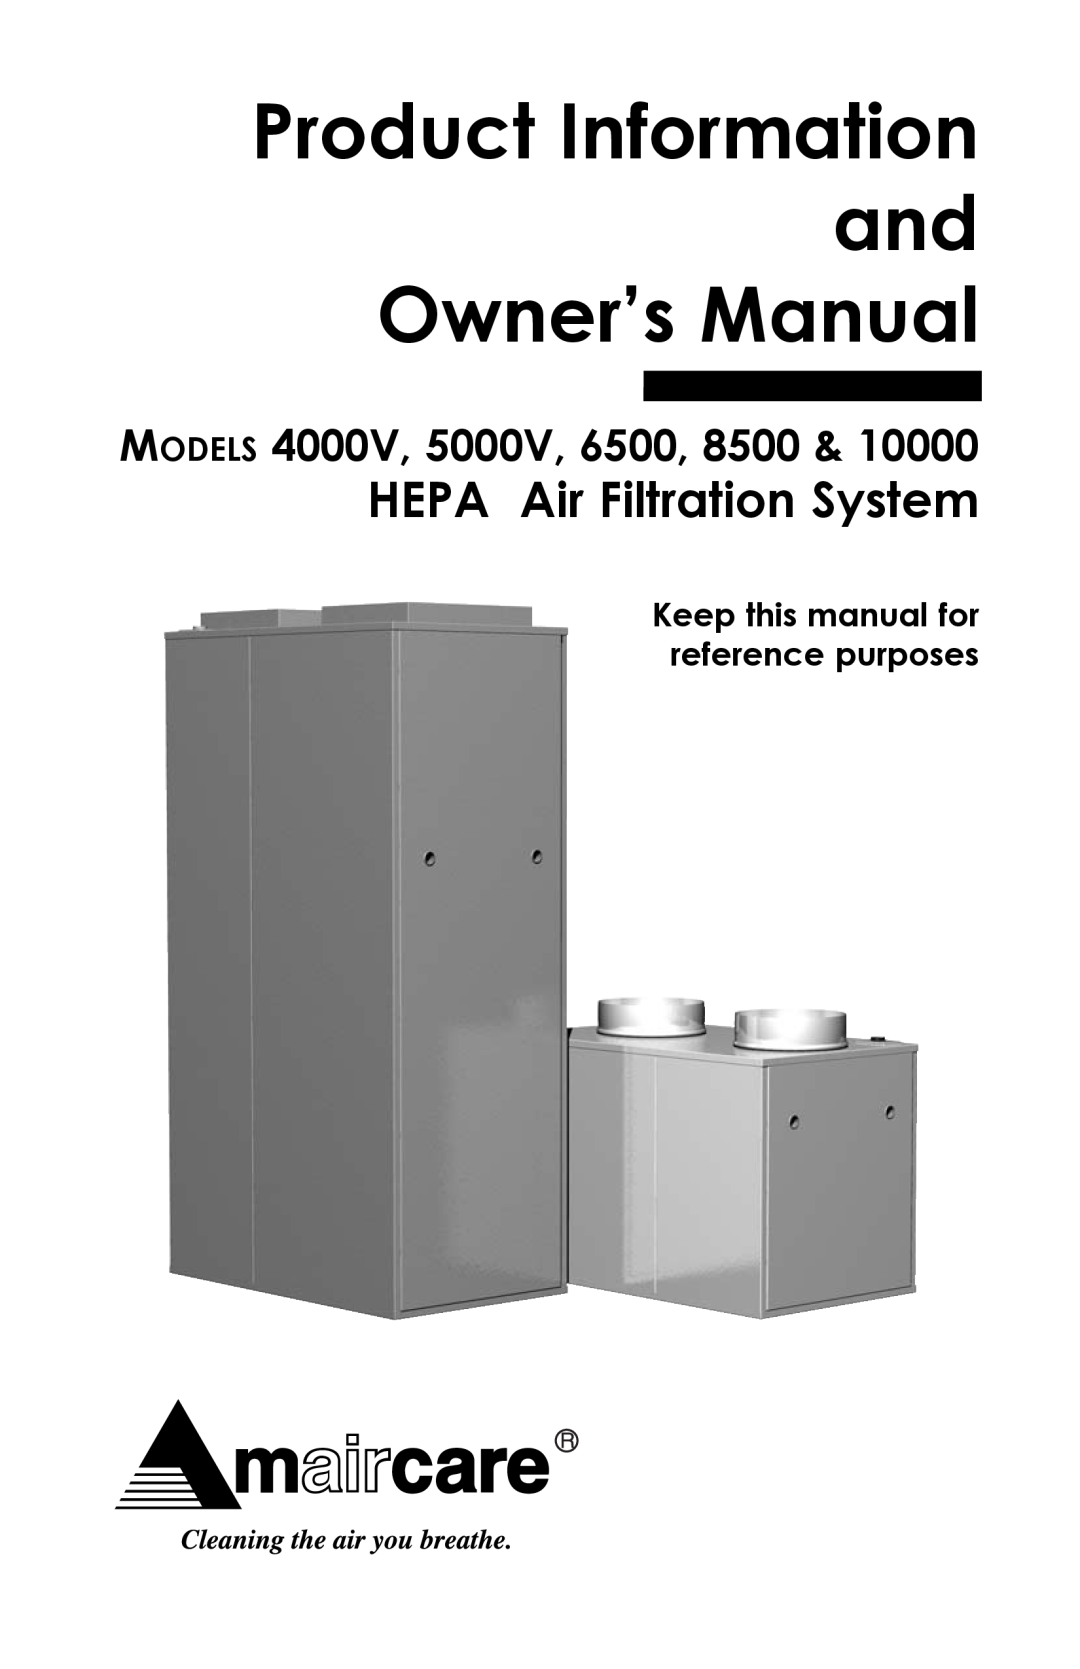 Americair 5000V, 8500, 6500, 4000V owner manual Keep this manual for reference purposes, HEPA Air Filtration System, Models 